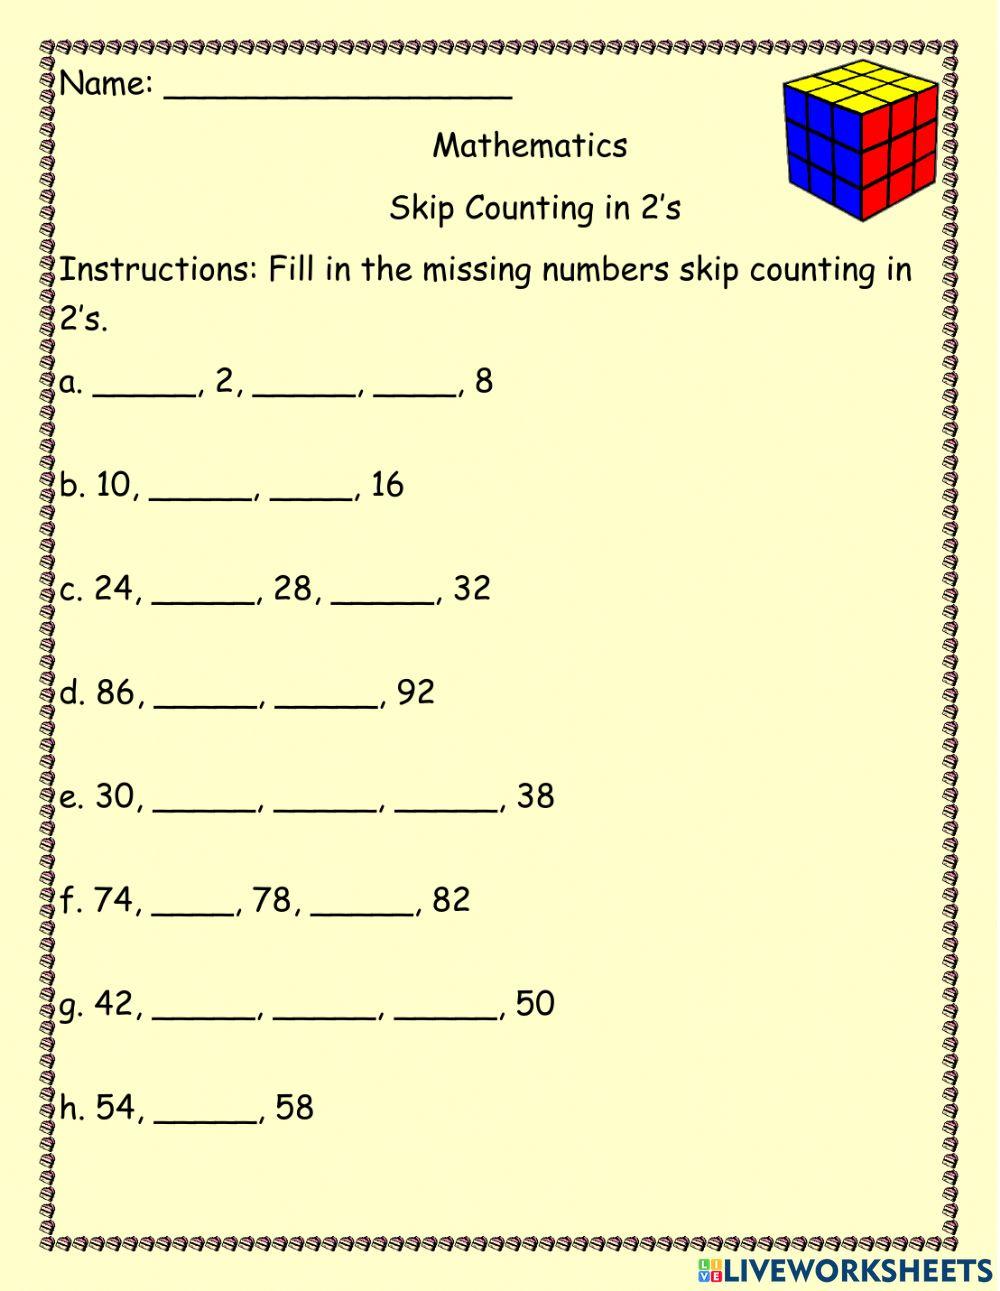 Skip counting in 2's